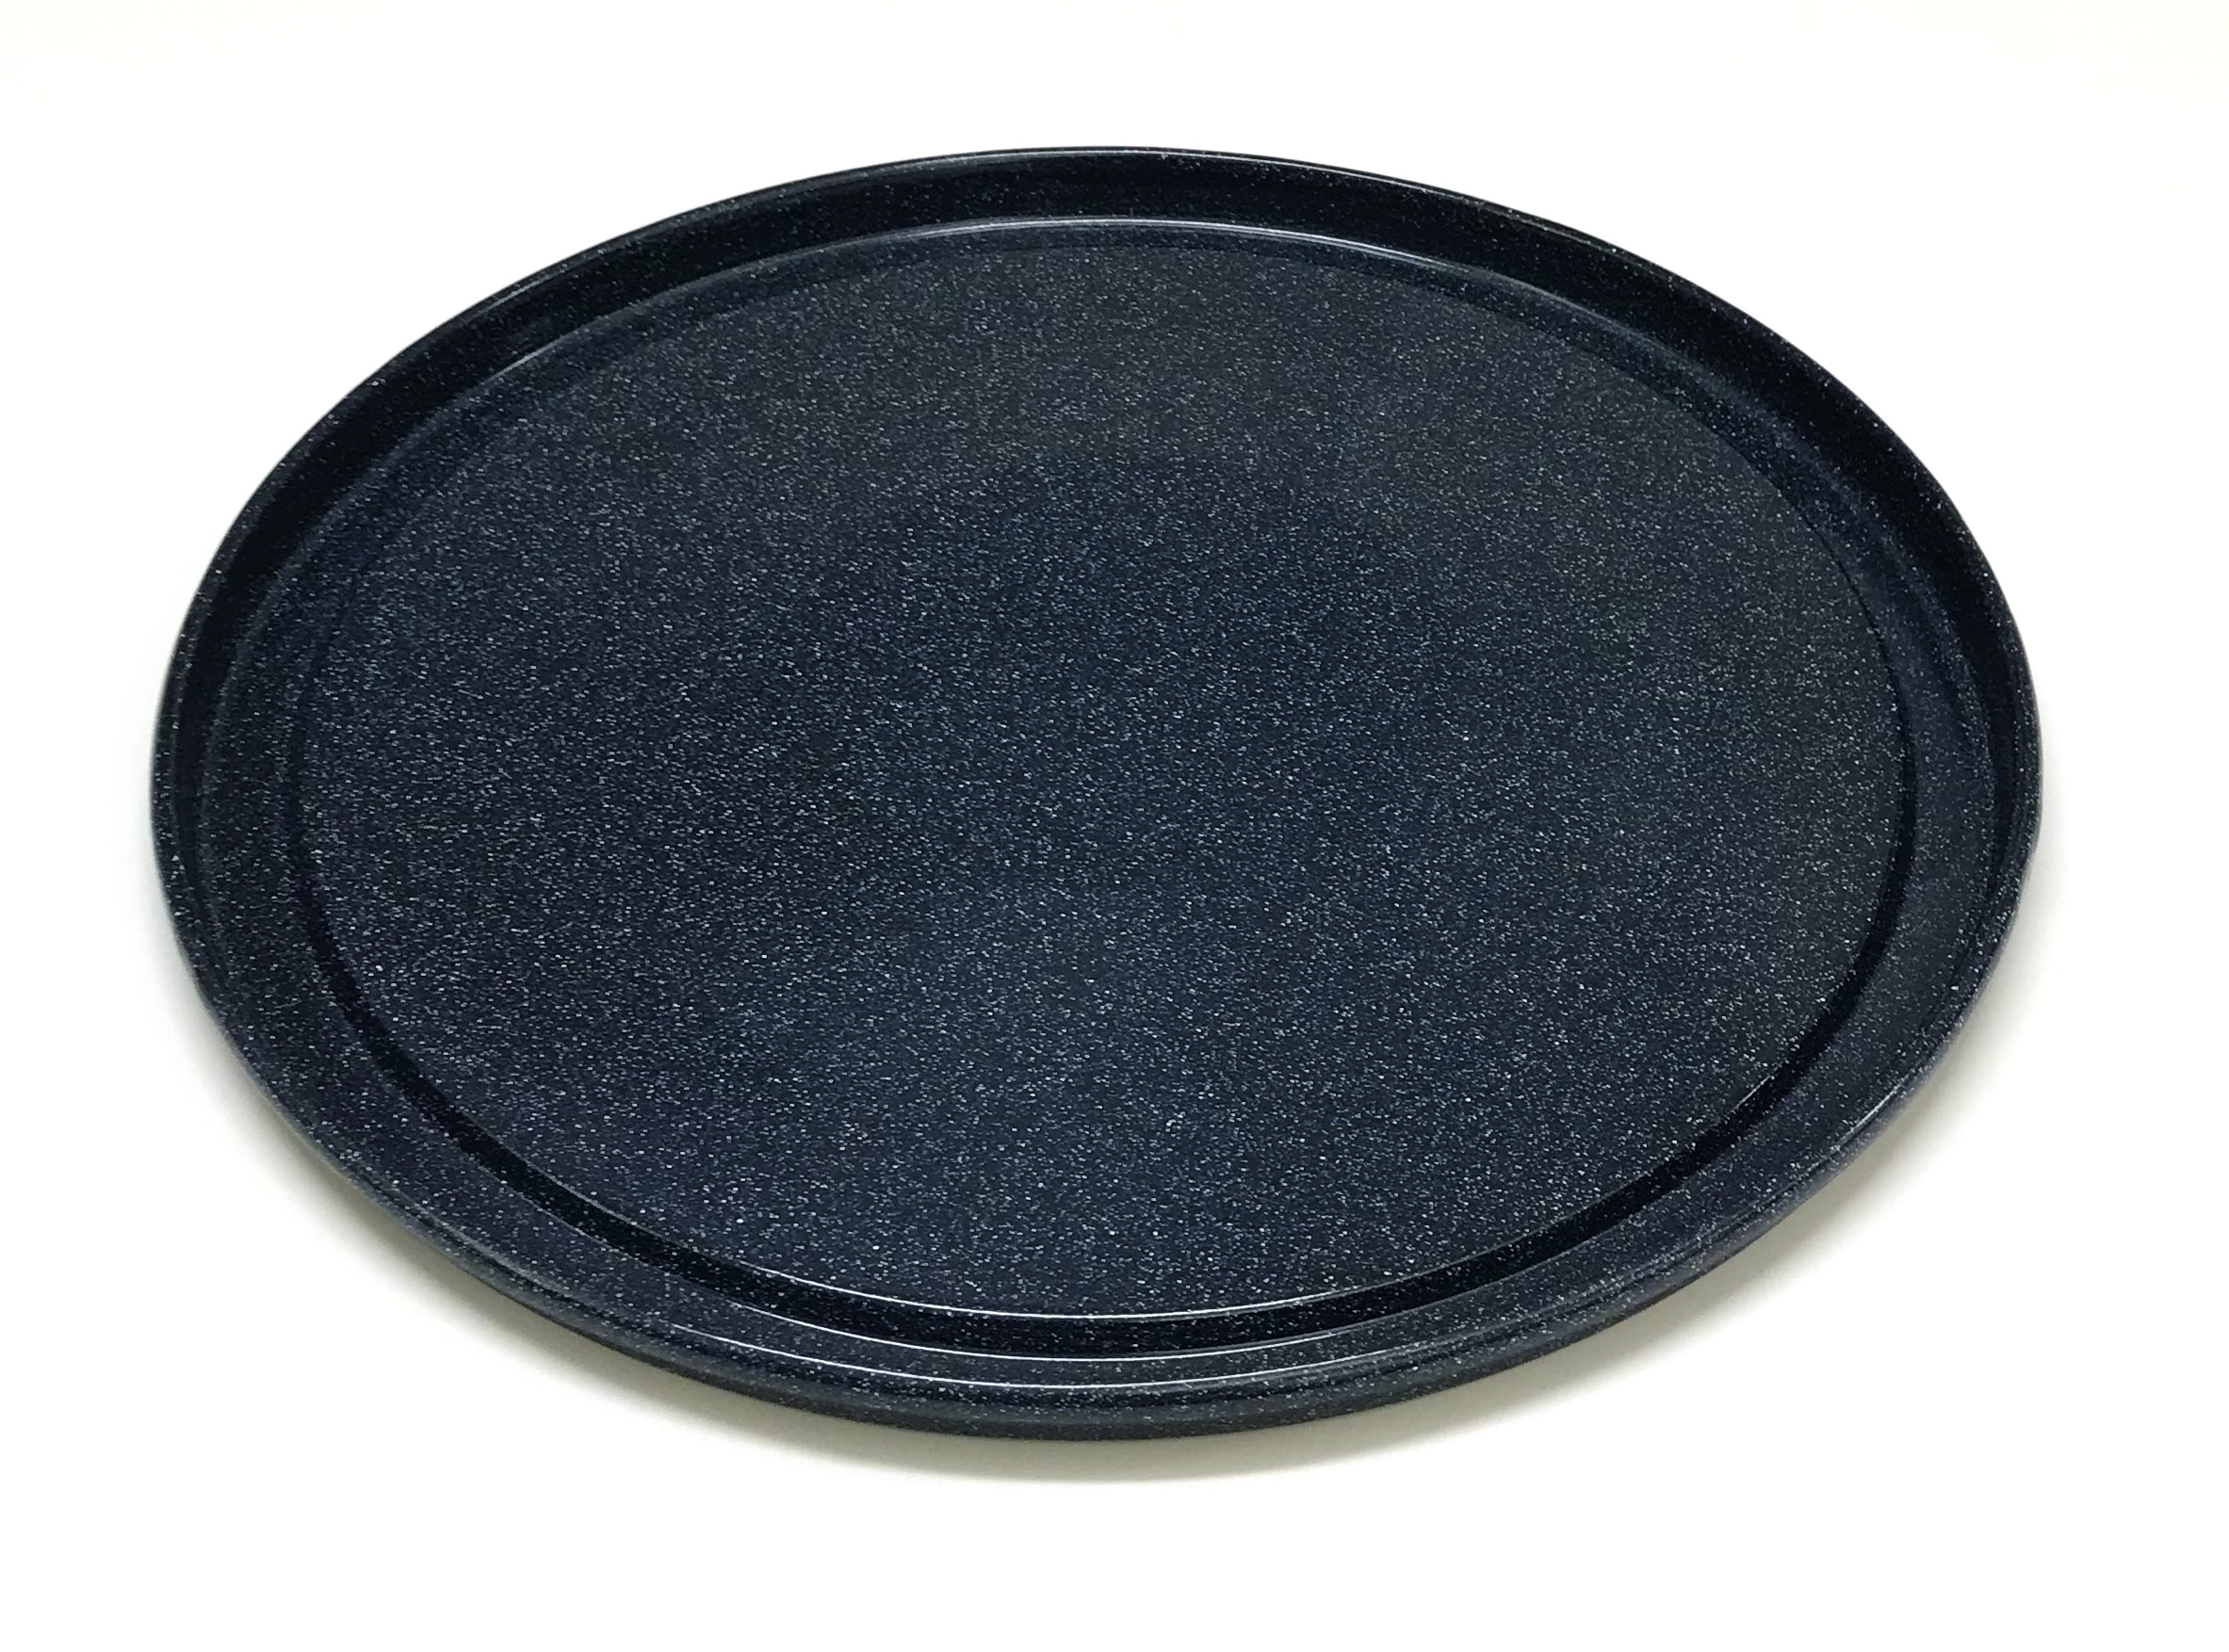 Sharp OEM Sharp Convection Microwave Turntable Tray  Shipped With R9H91, R-9H91